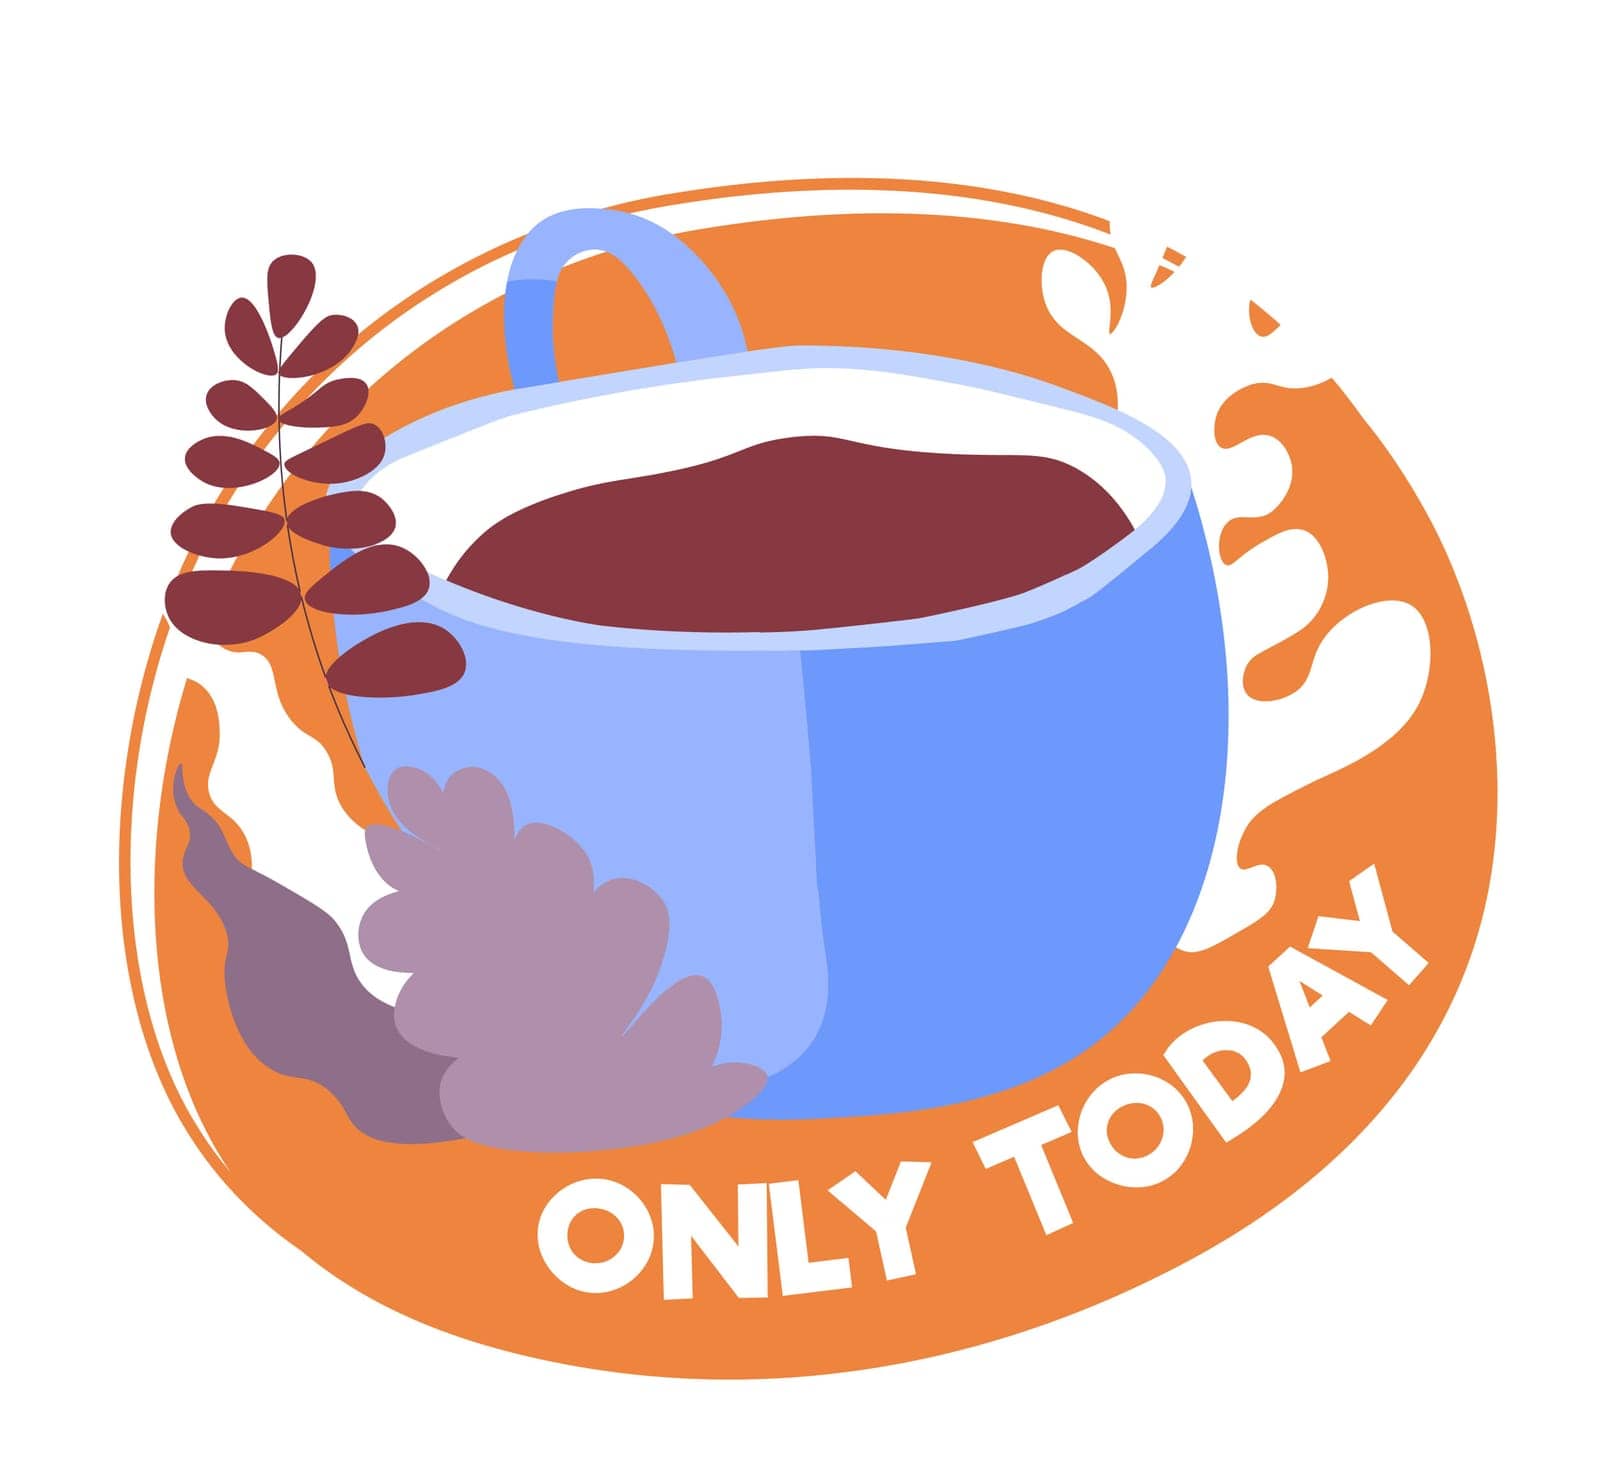 Only today tasty coffee beverage in cafe vector by Sonulkaster